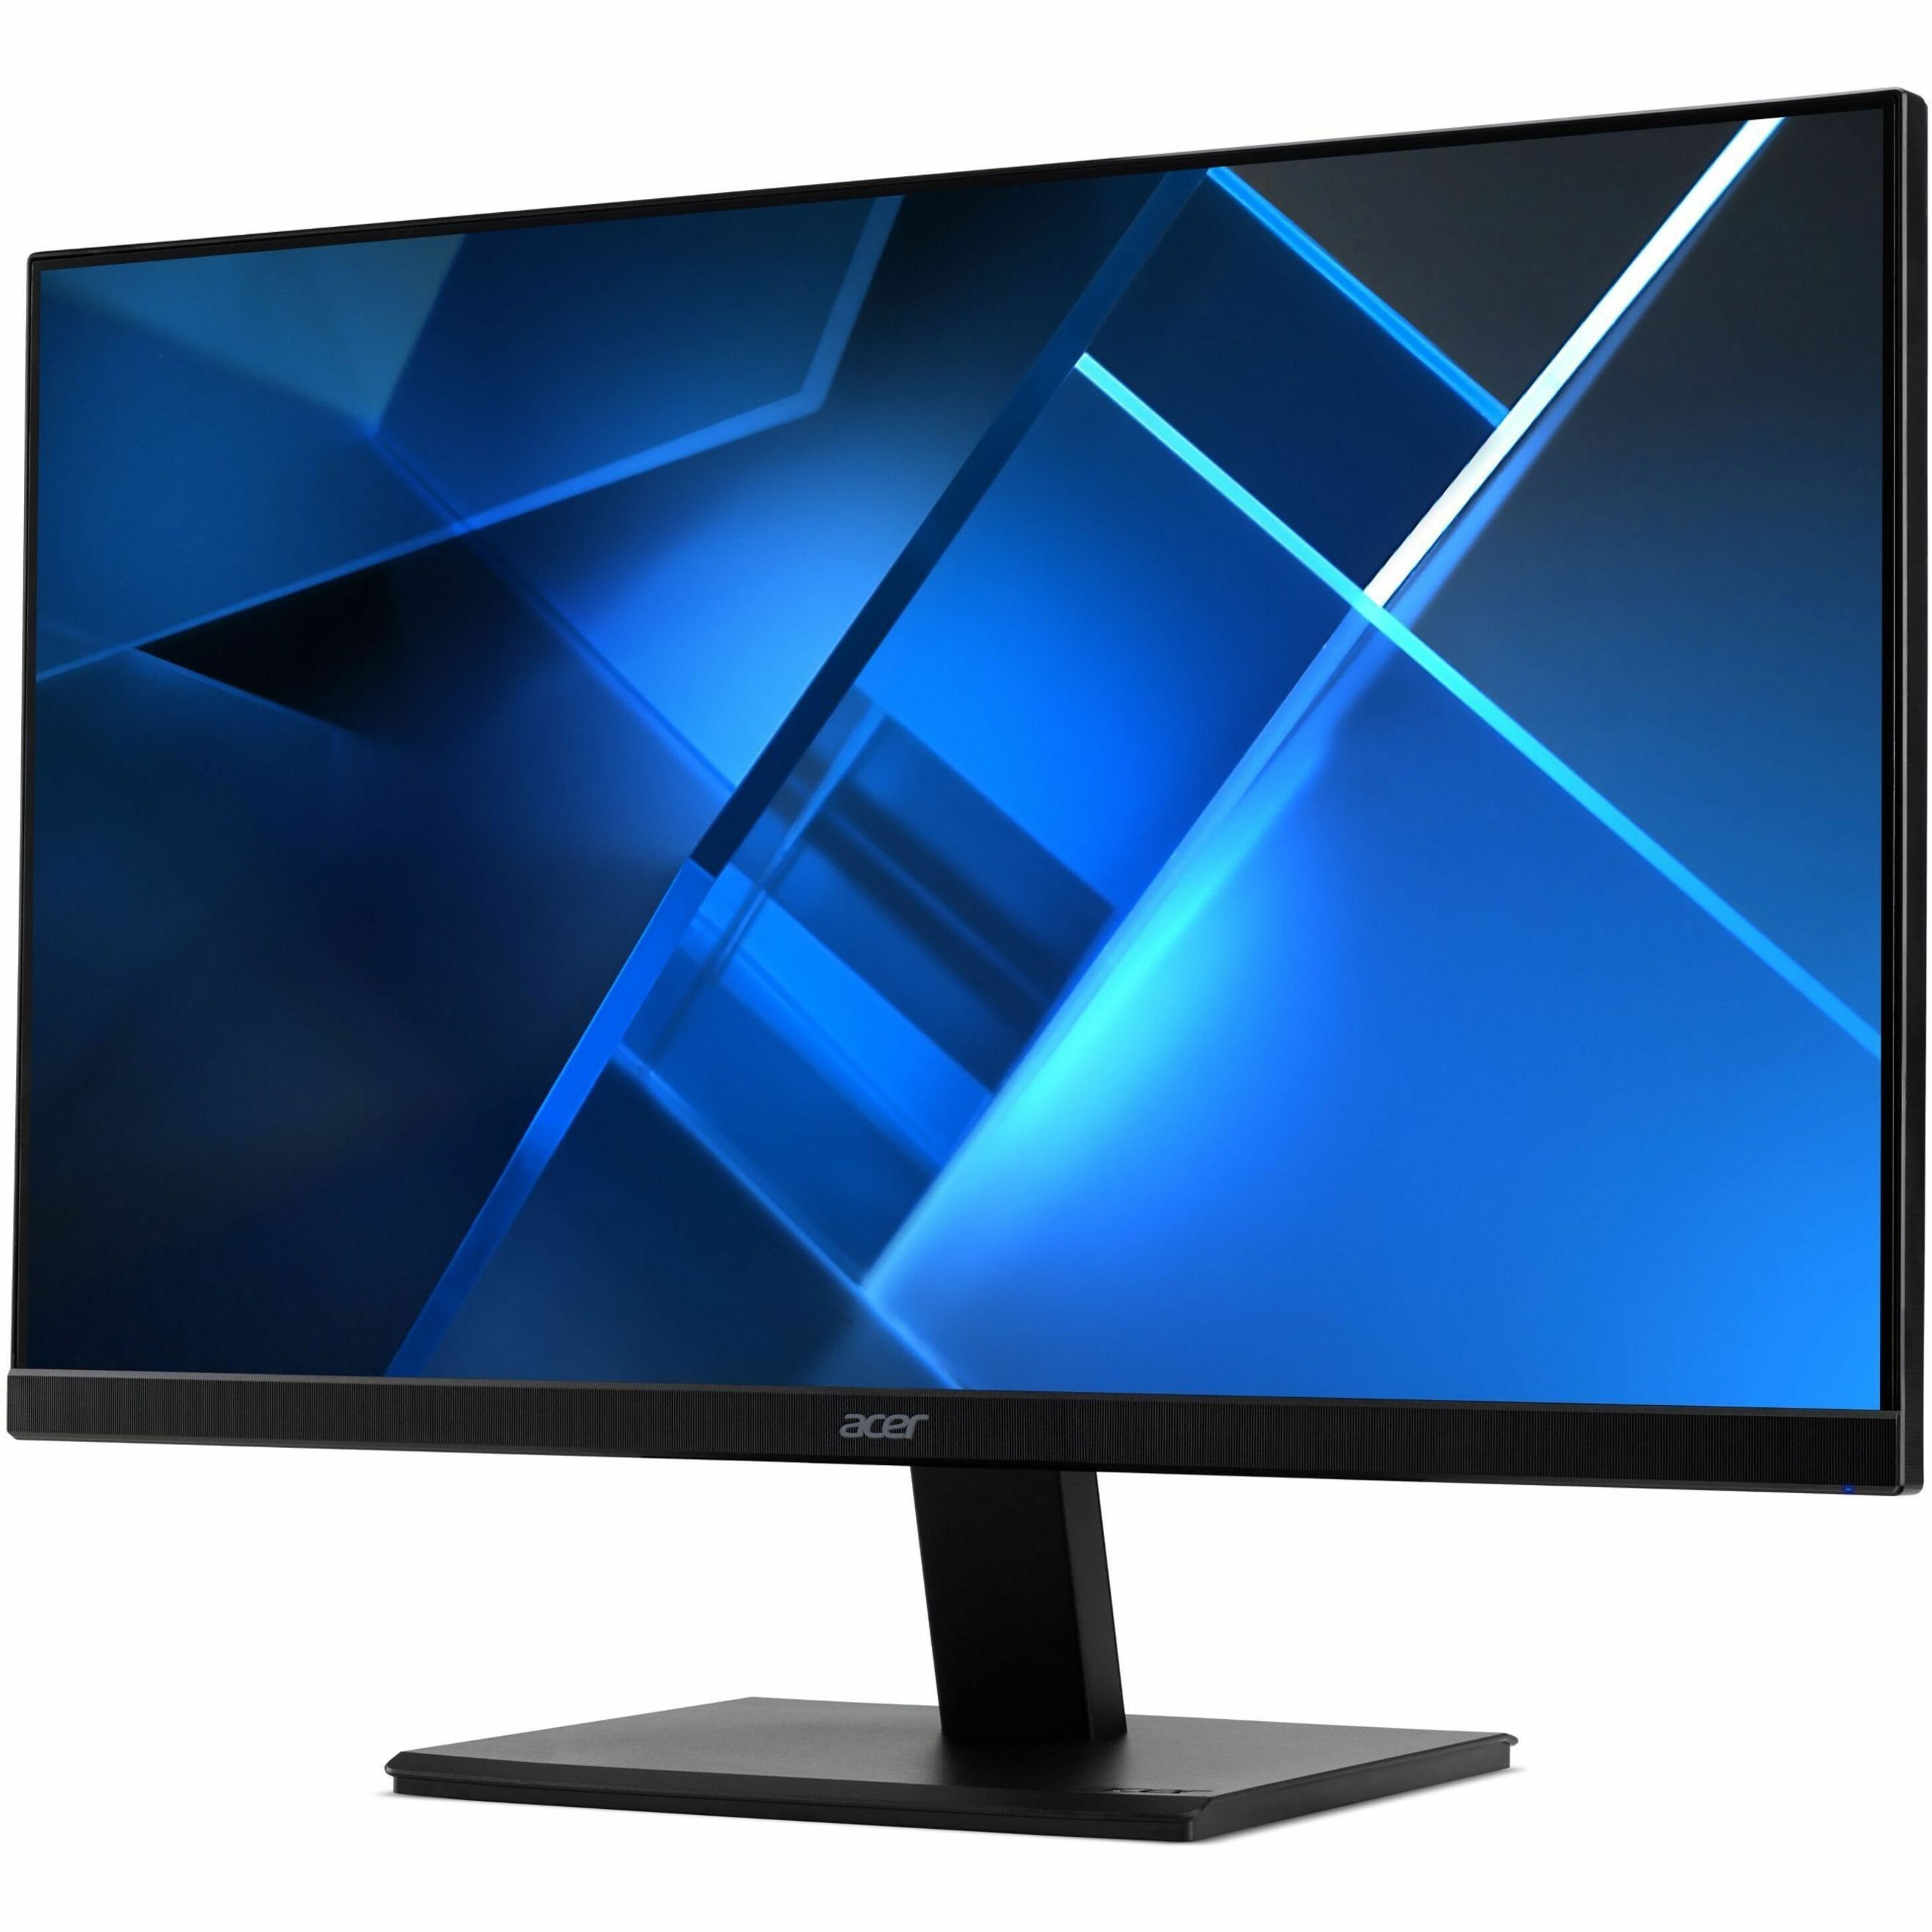 Acer UM.QV7AA.H01 V247Y H Widescreen LCD Monitor, 23.8, 4ms GTG, FreeSync, 250 Nit